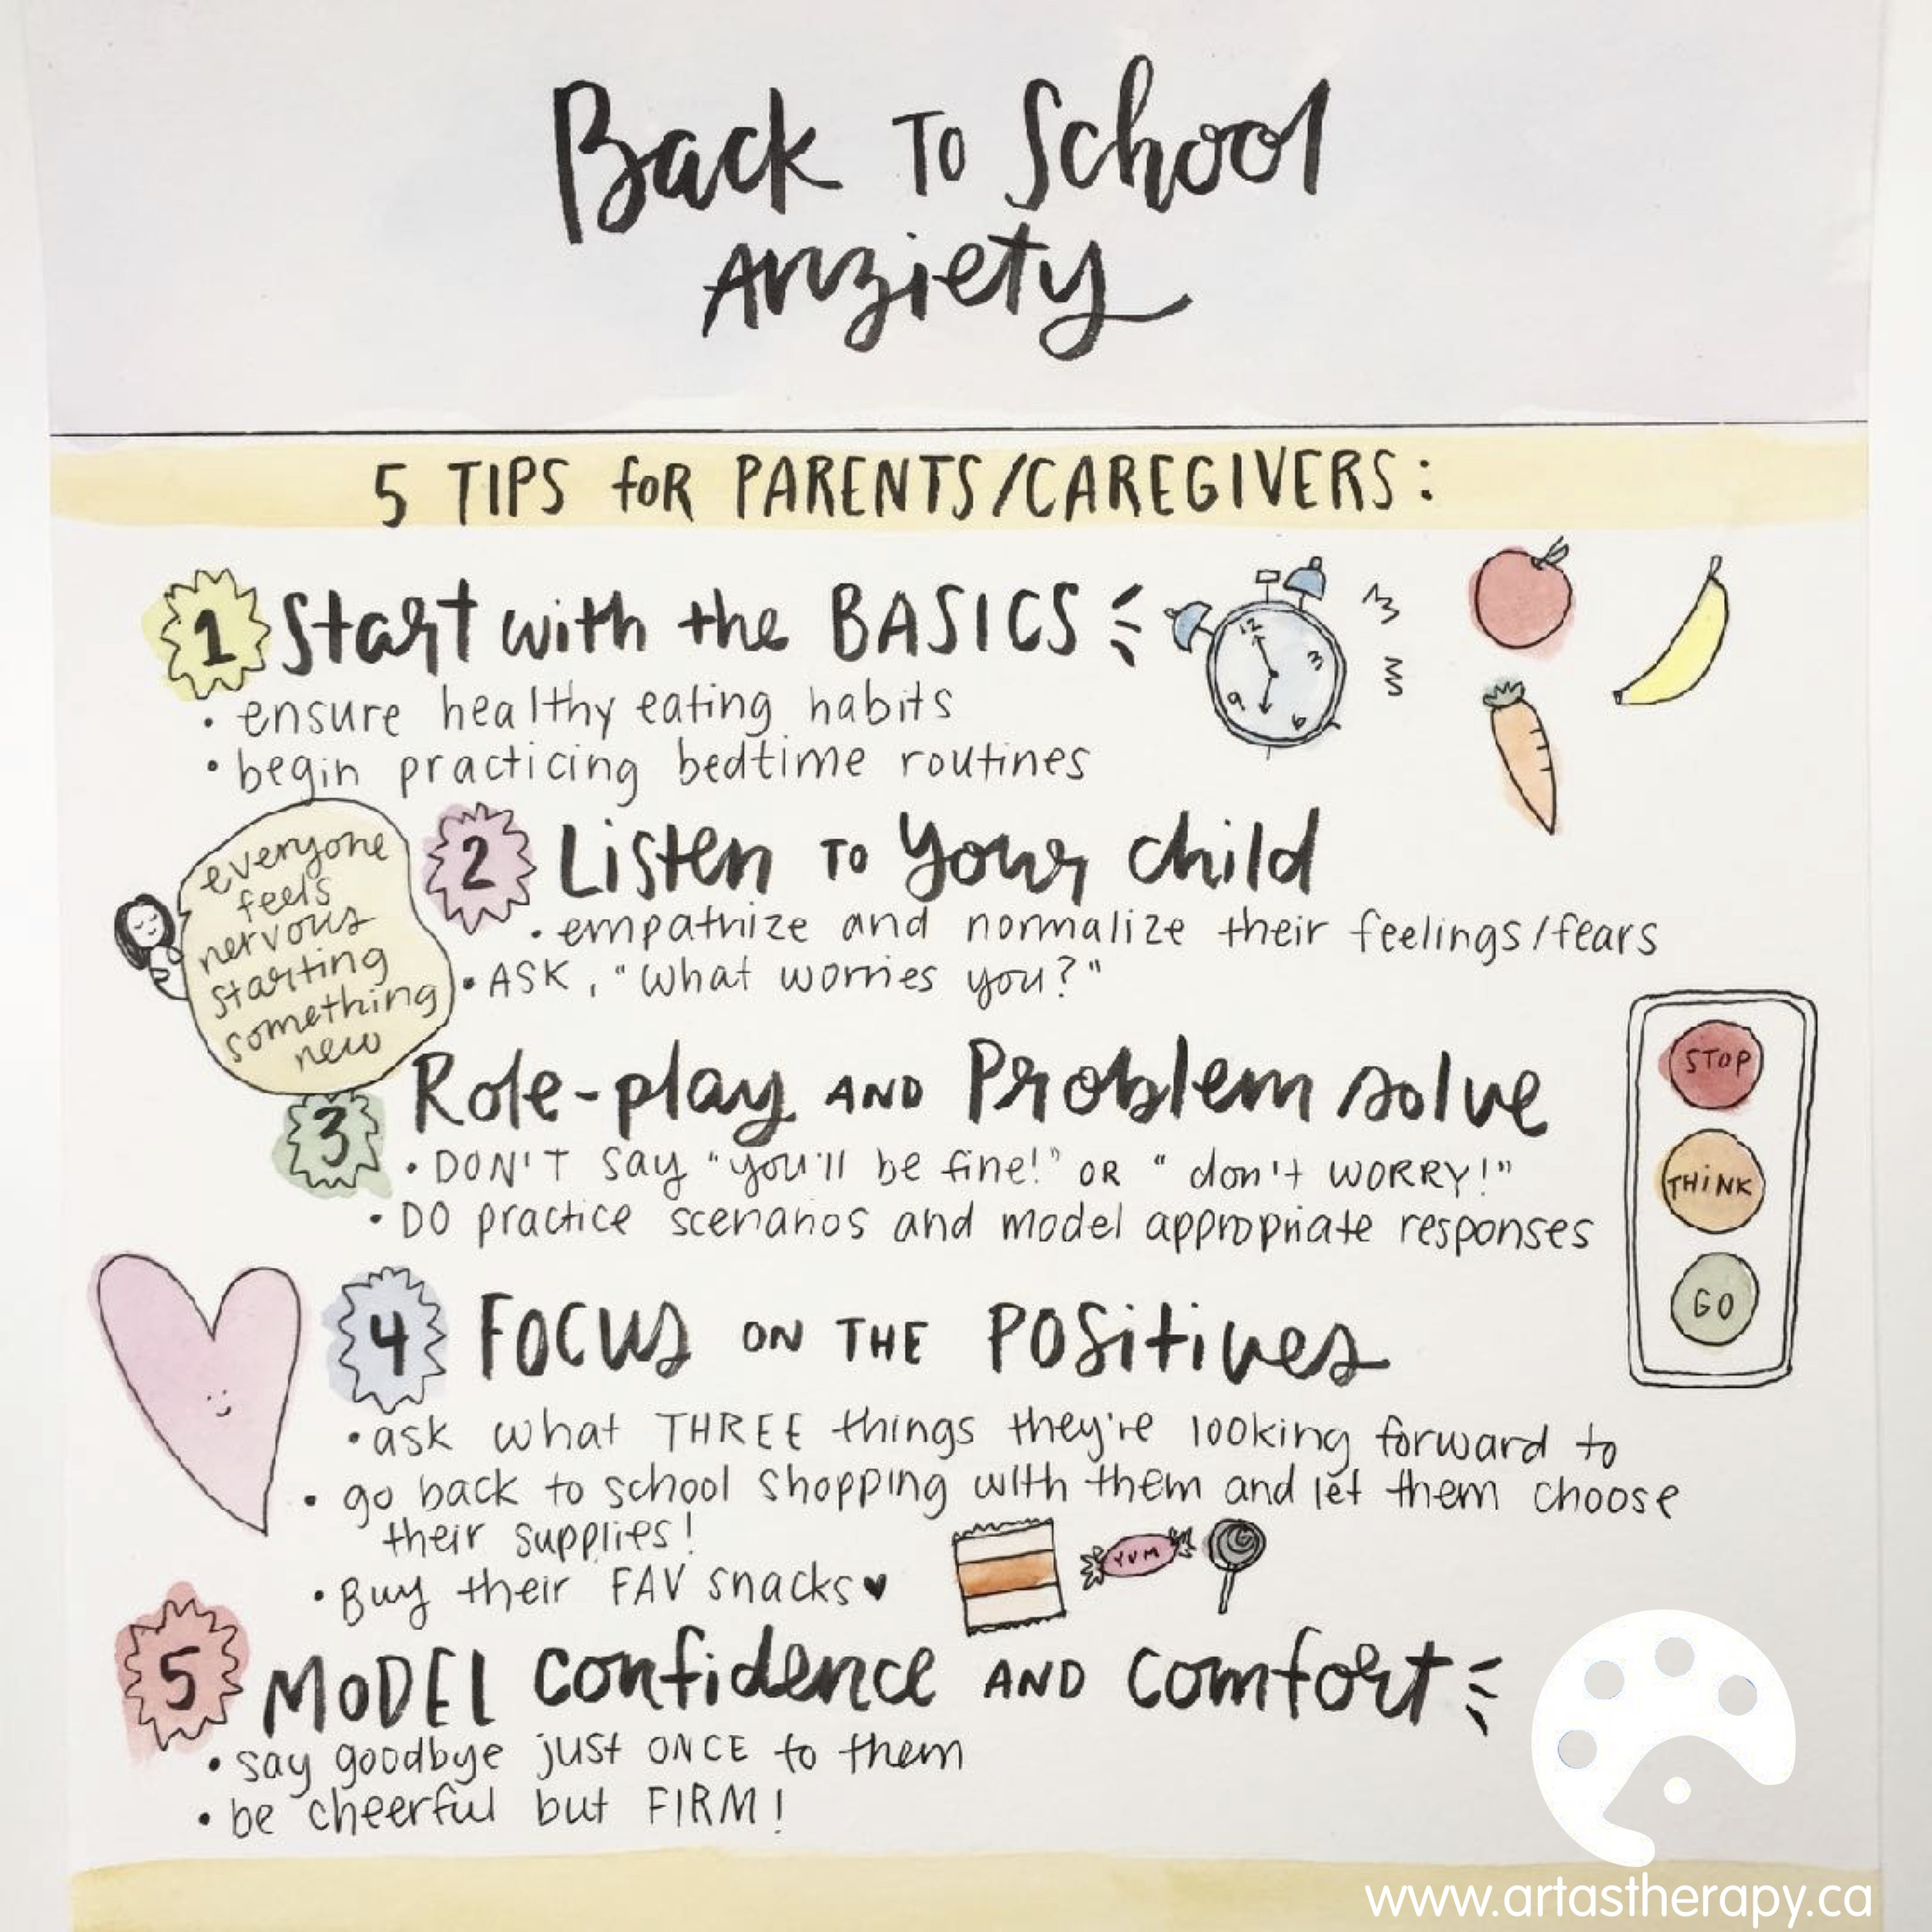 How to Beat Back-to-School Anxiety - Door County Partnership for